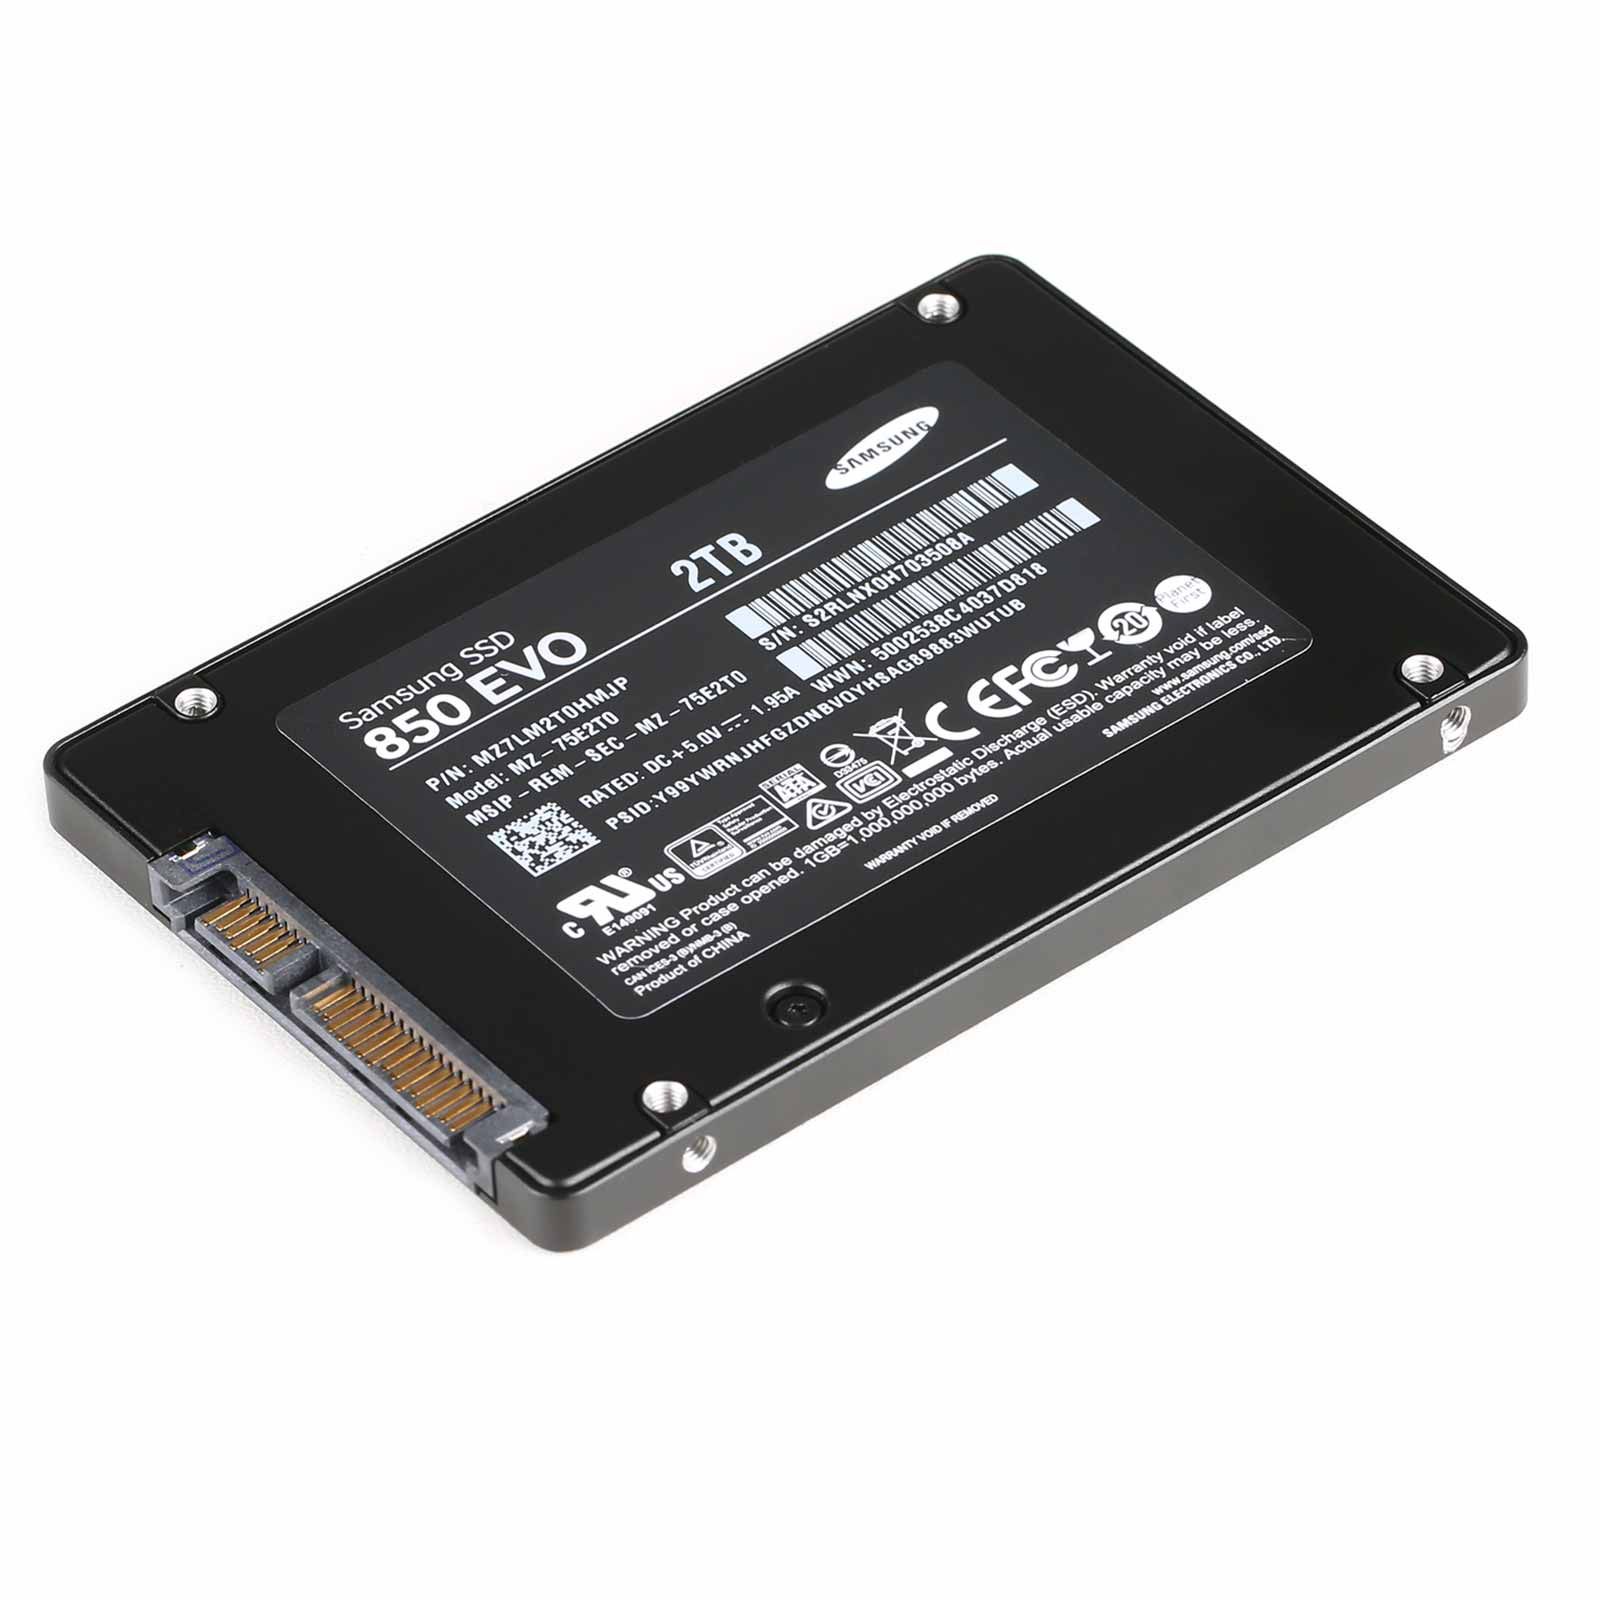 2TB SSD with Full Brands Software for VXDIAG MULTI TOOL